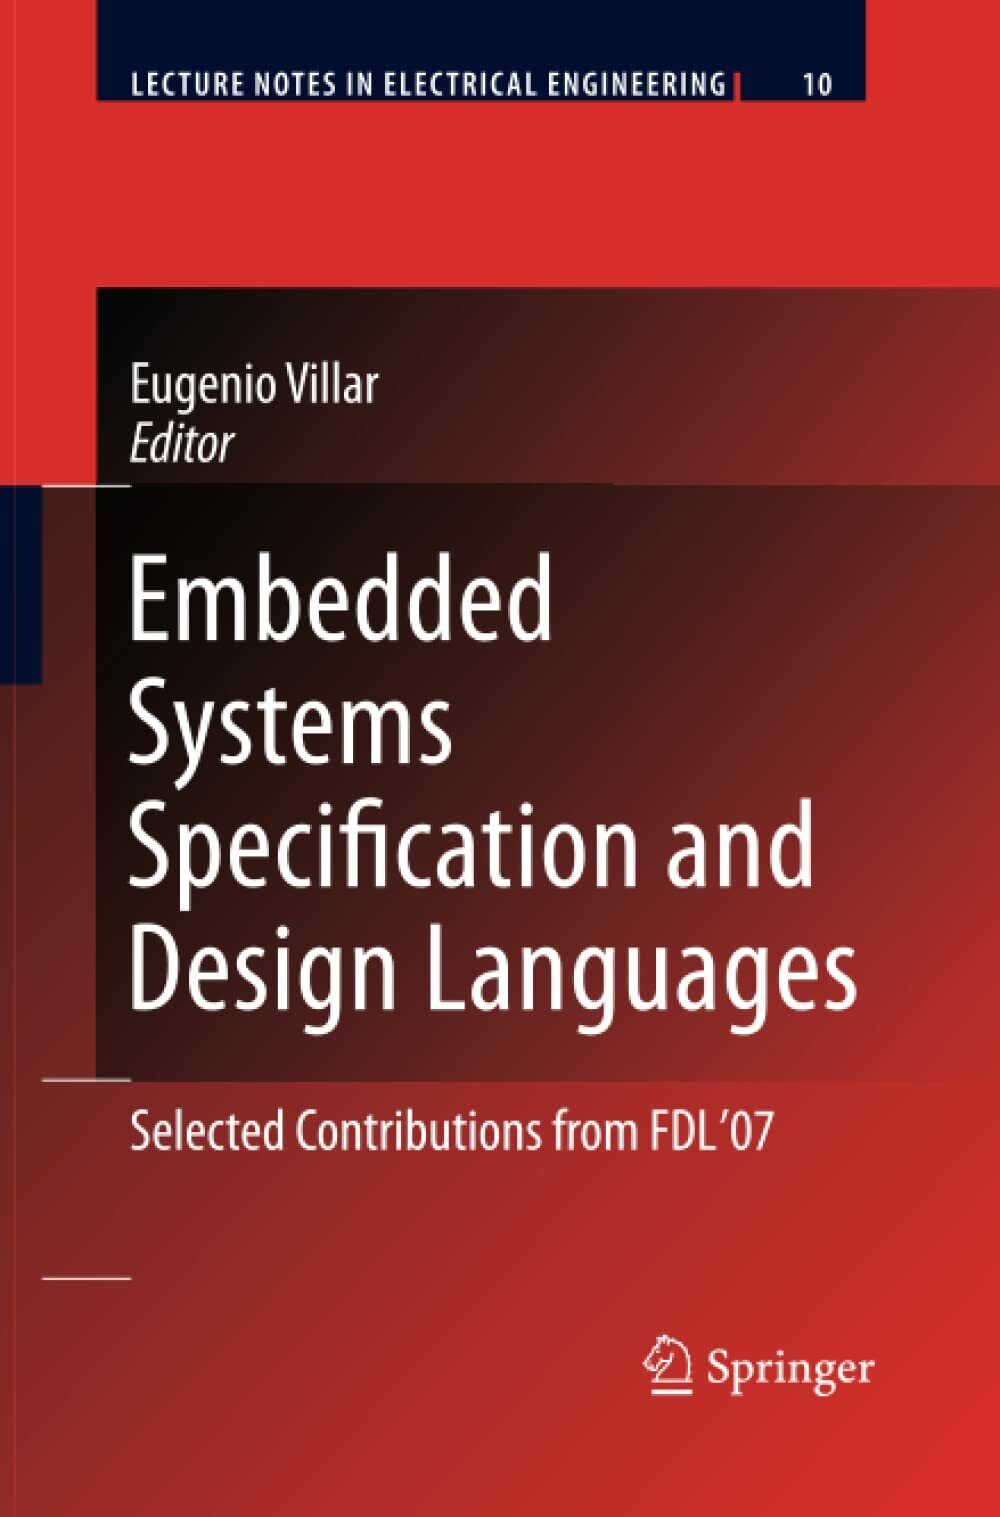 Embedded Systems Specification and Design Languages - Eugenio Villar - 2010